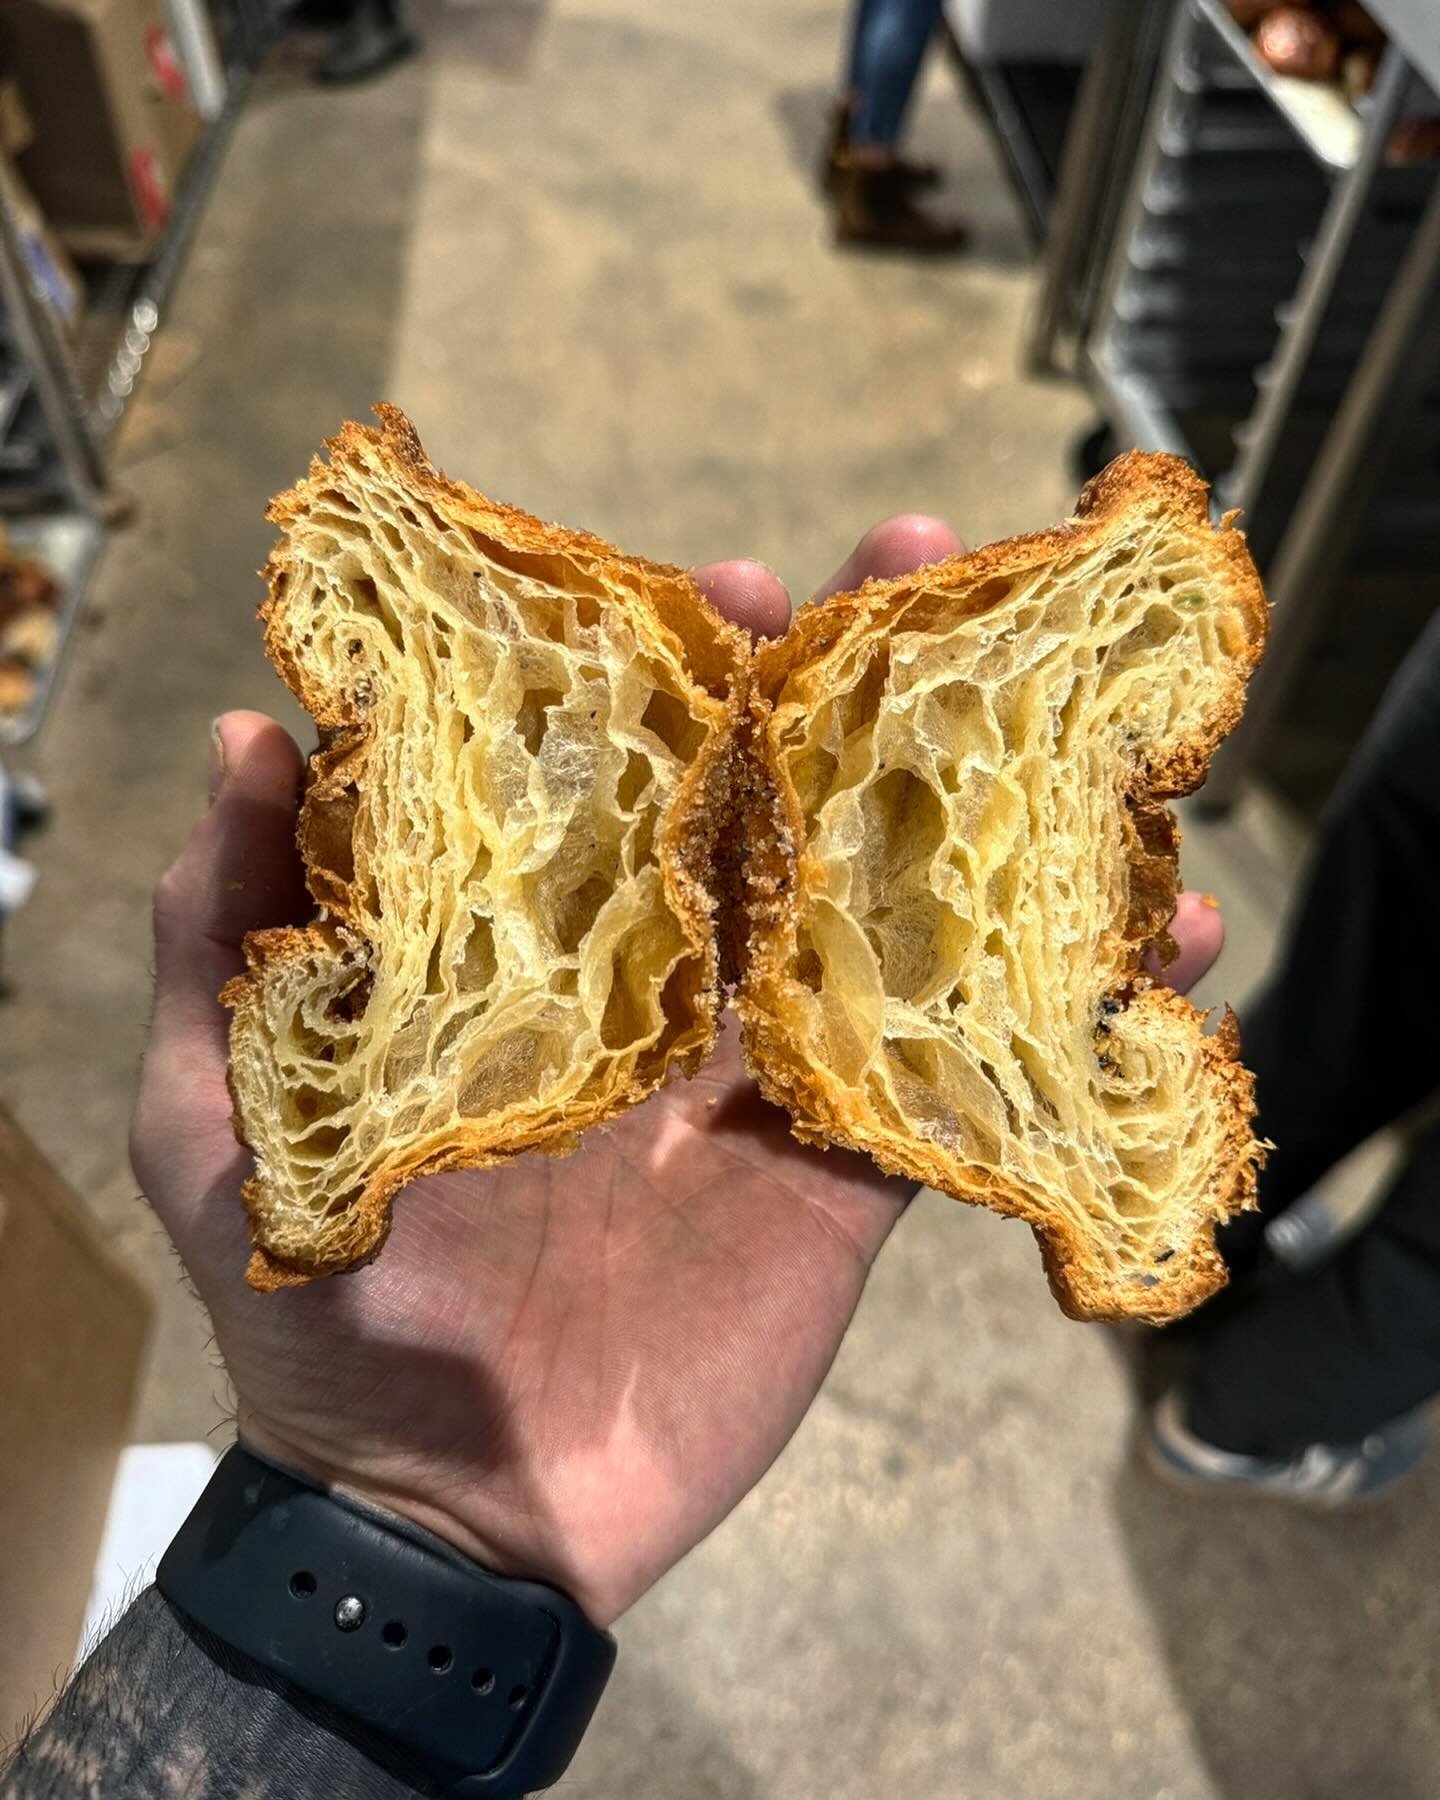 Our Kouign Amann. A more heavily buttered version of our classic croissant dough that&rsquo;s laminated with slightly salted sugar then baked to caramelized perfection. One of our regular items Available Wednesday-Sunday every week.